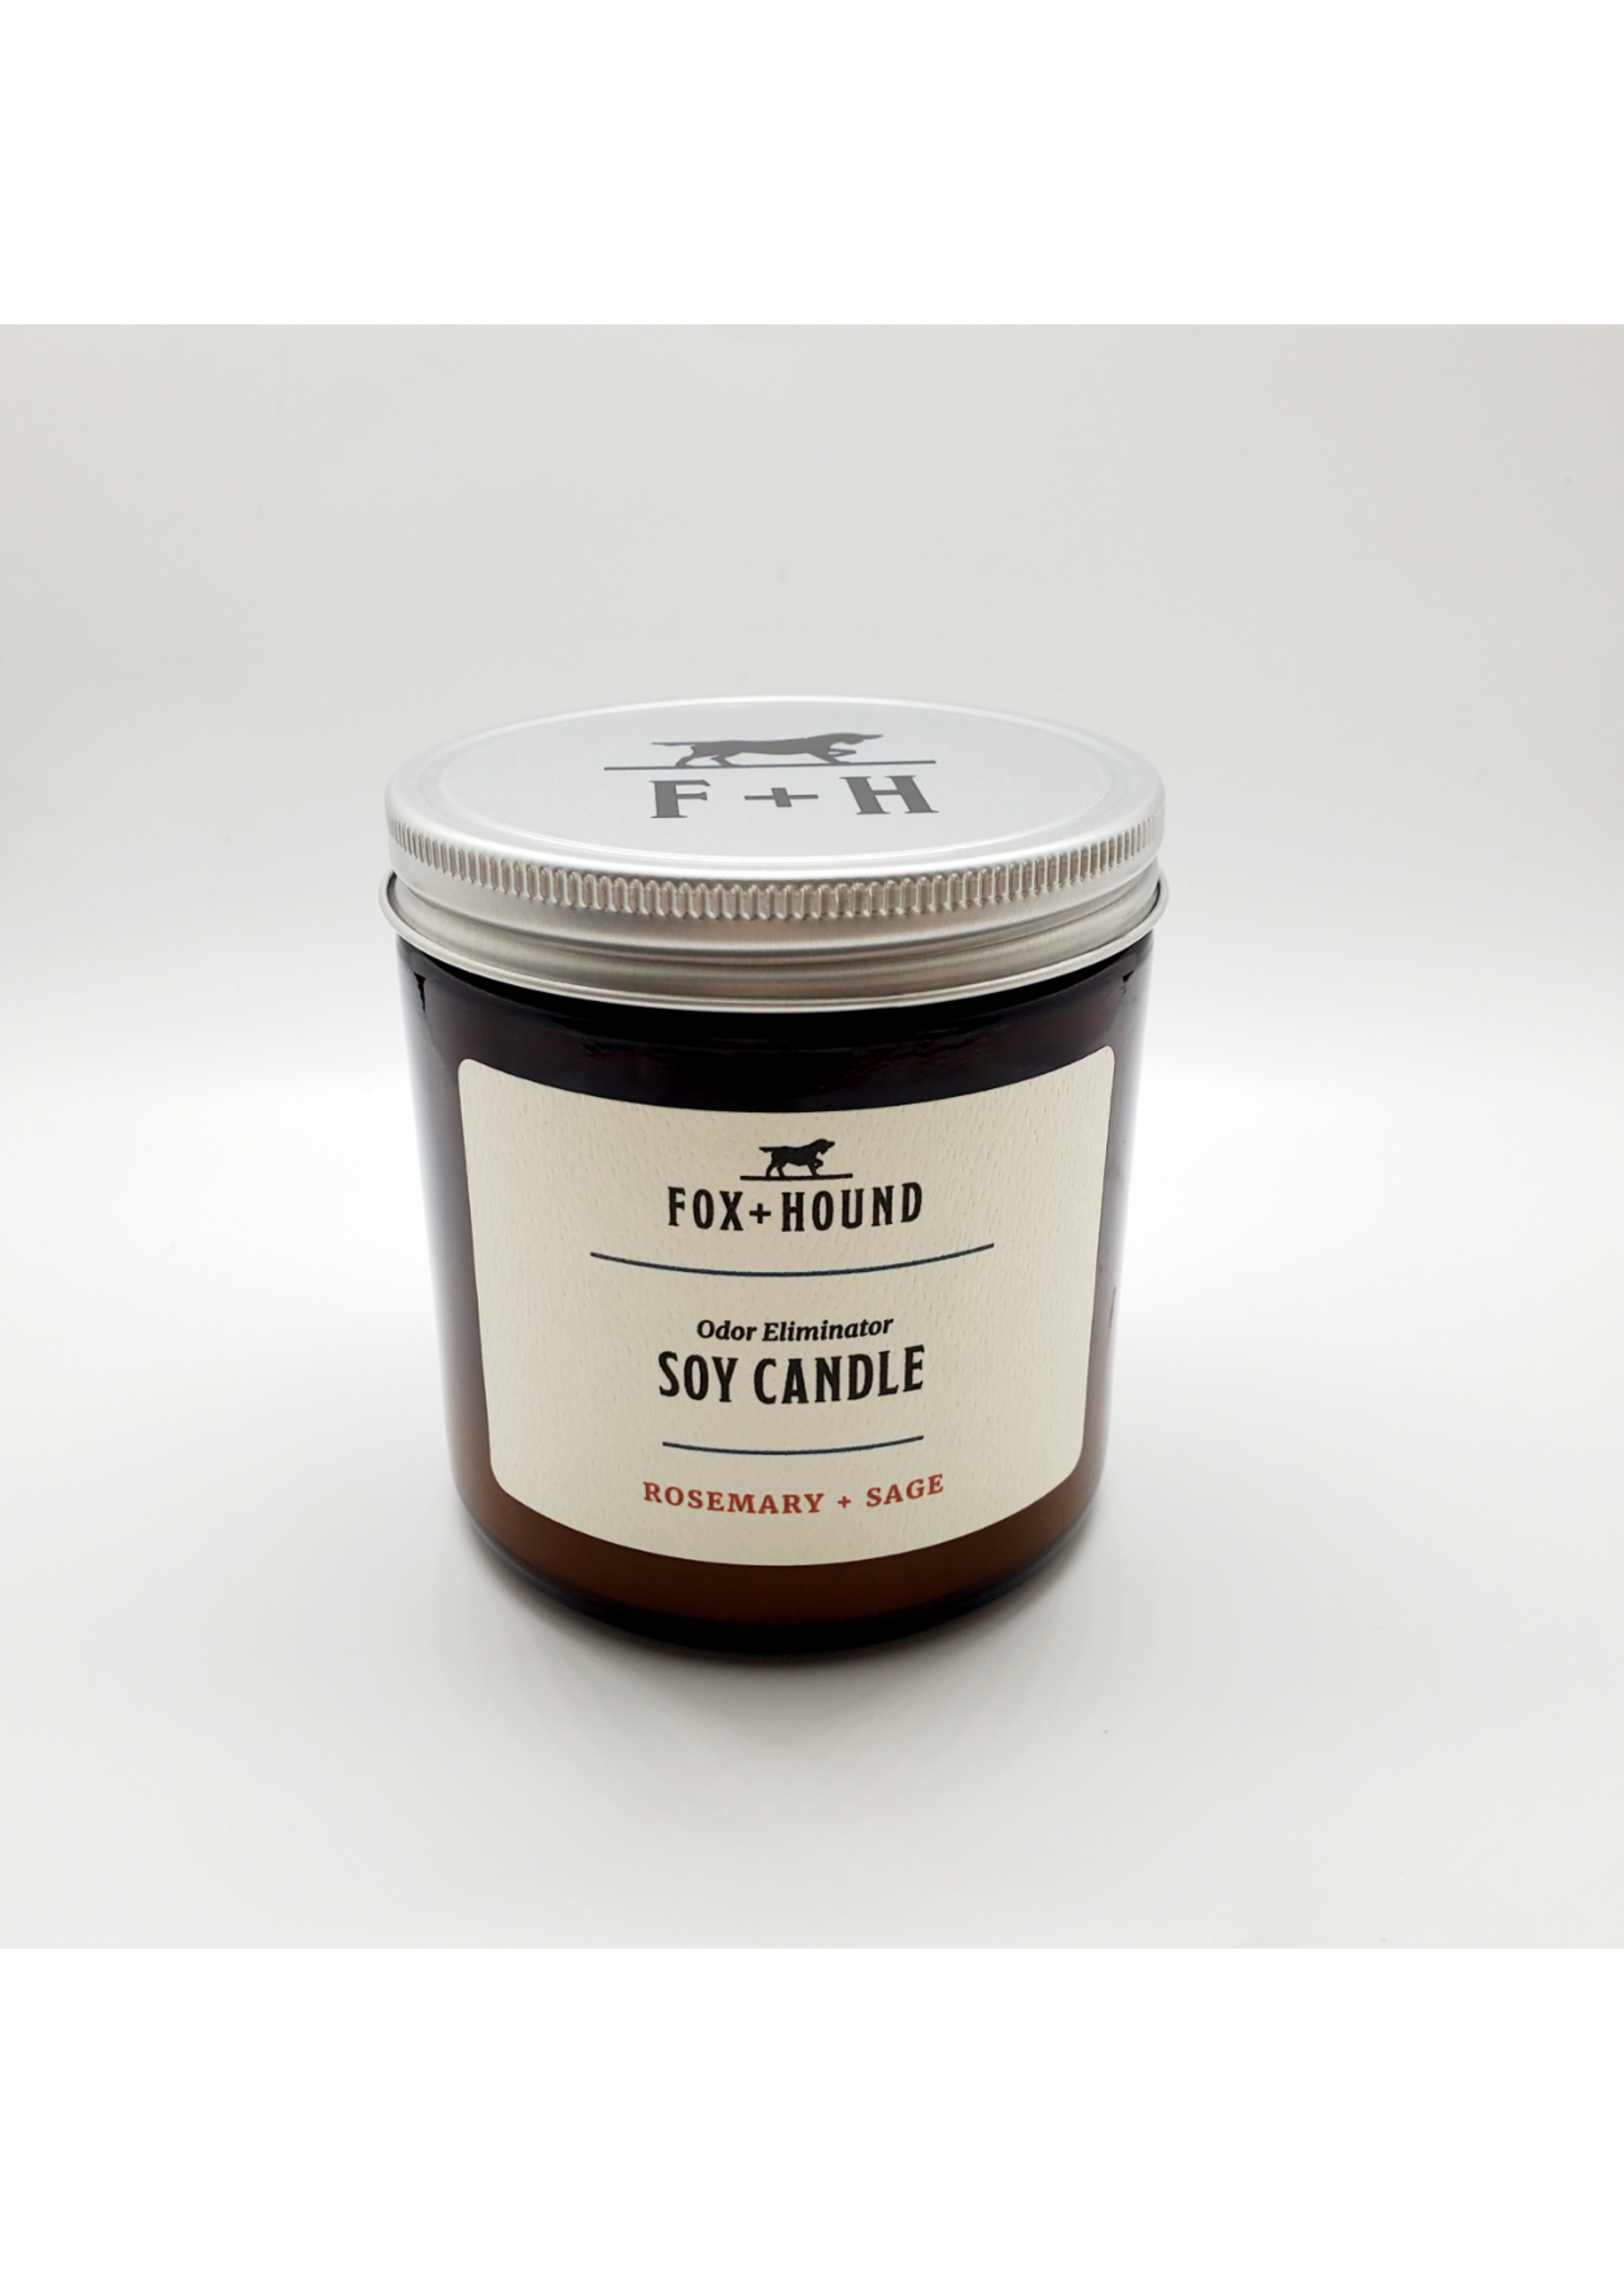 Fox + Hound Odor Eliminating Soy Candle - Rosemary & Sage